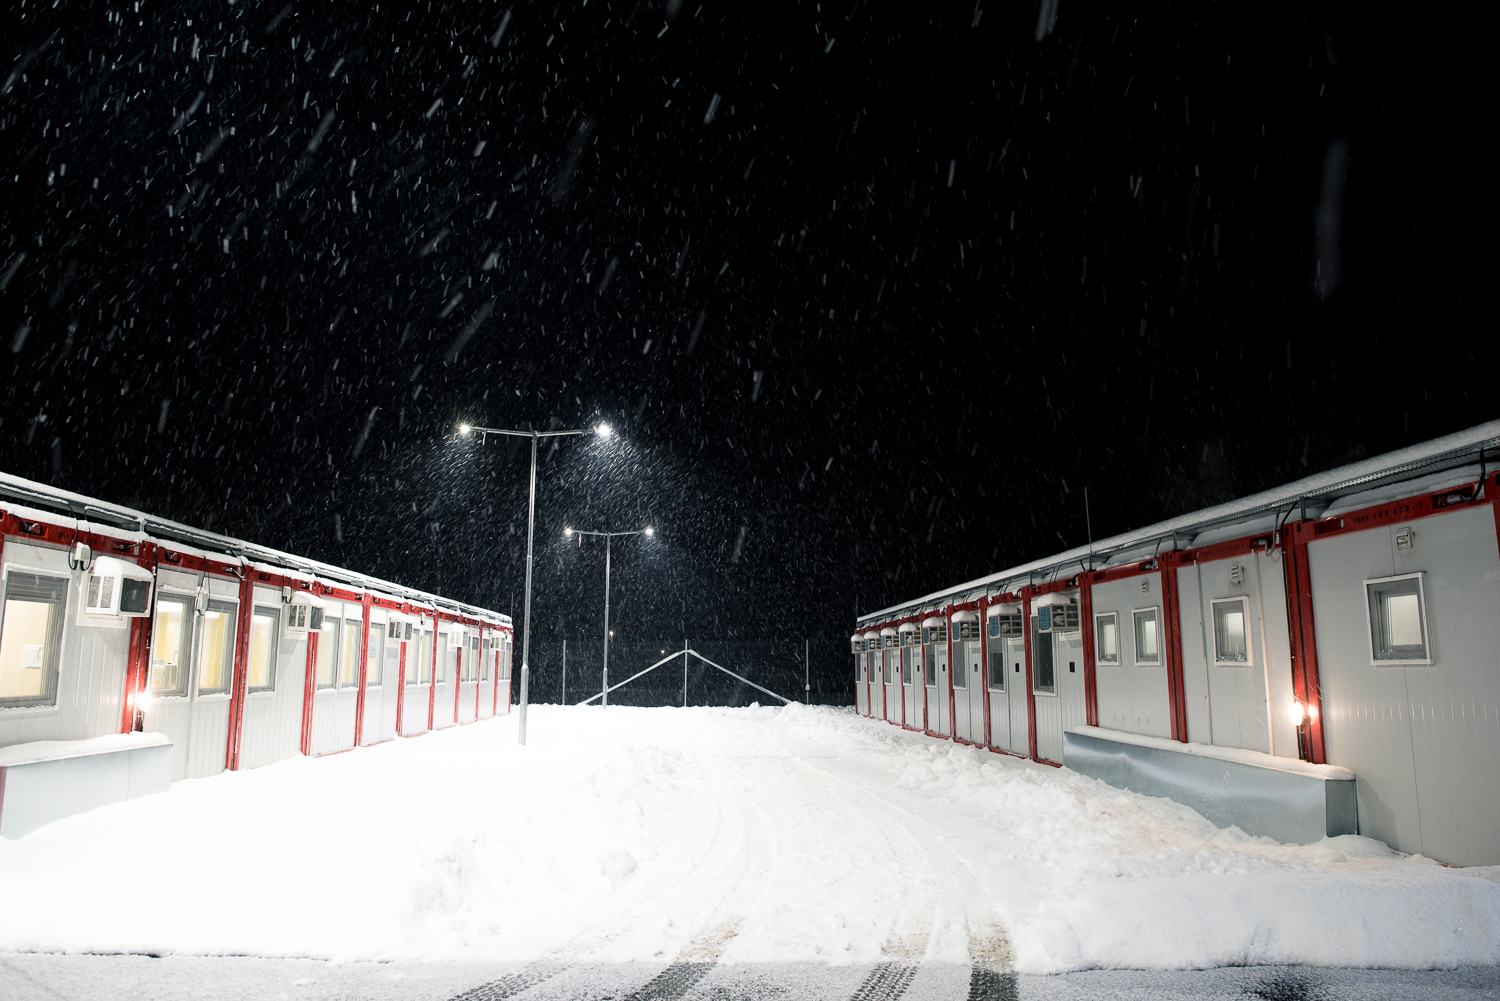  Border Protection Base during snowfall at Hercegszántó, Hungary 27 February 2018.  The fence was constructed in the middle of the European migration crisis in 2015, with the aim to ensure border security by preventing immigrants from entering the co